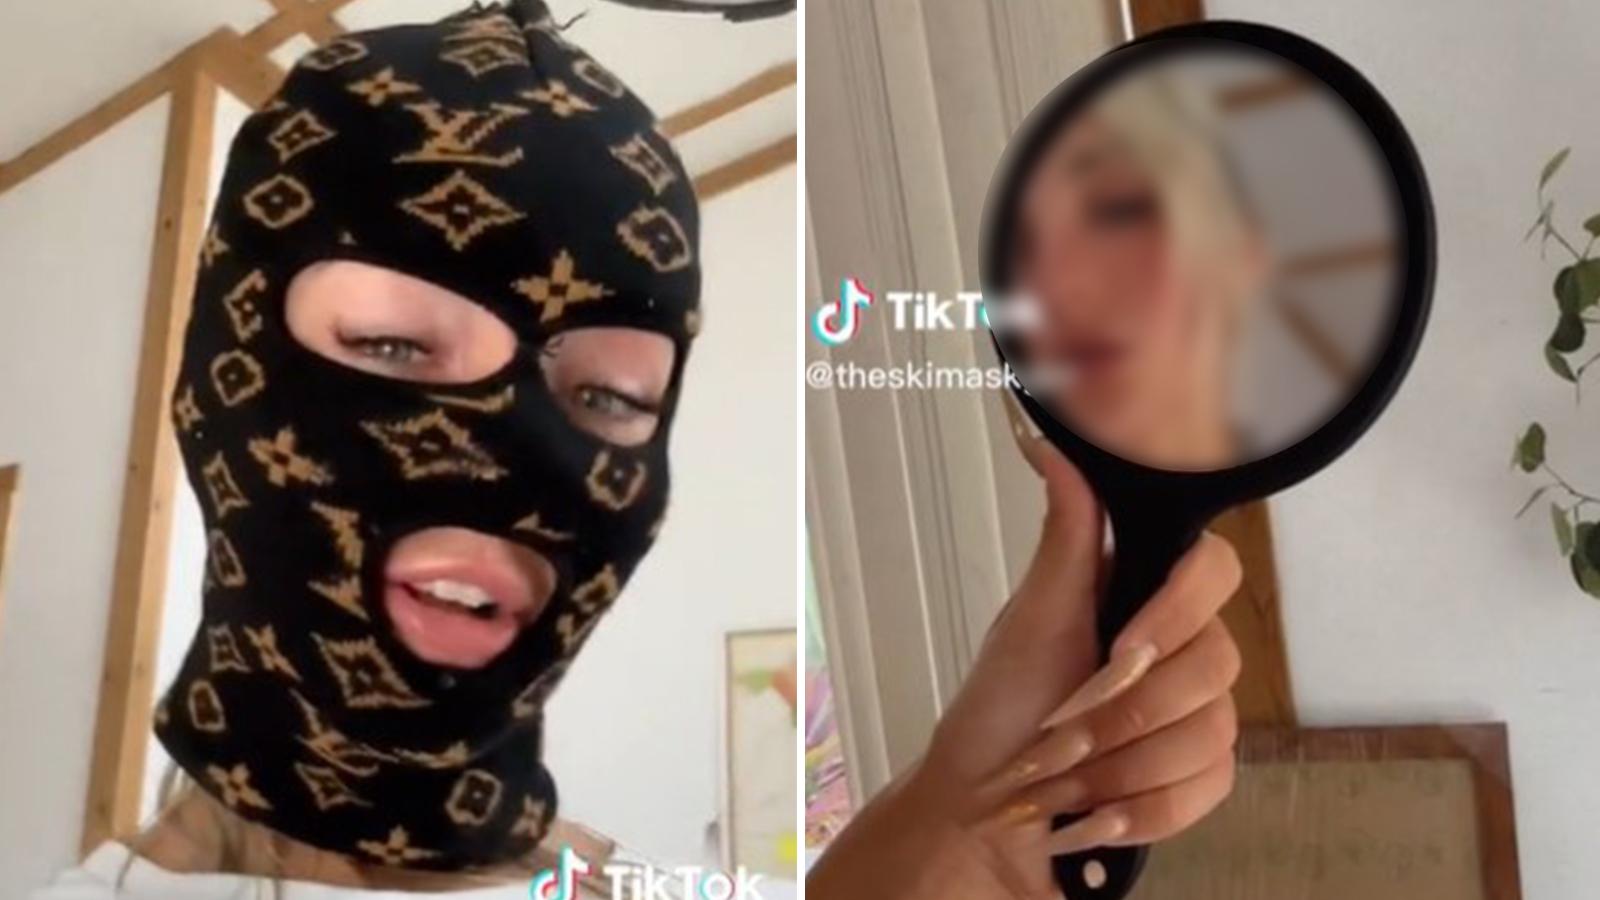 The TikTok star known as TheSkiMaskGirl has revealed her face - Tubefilter